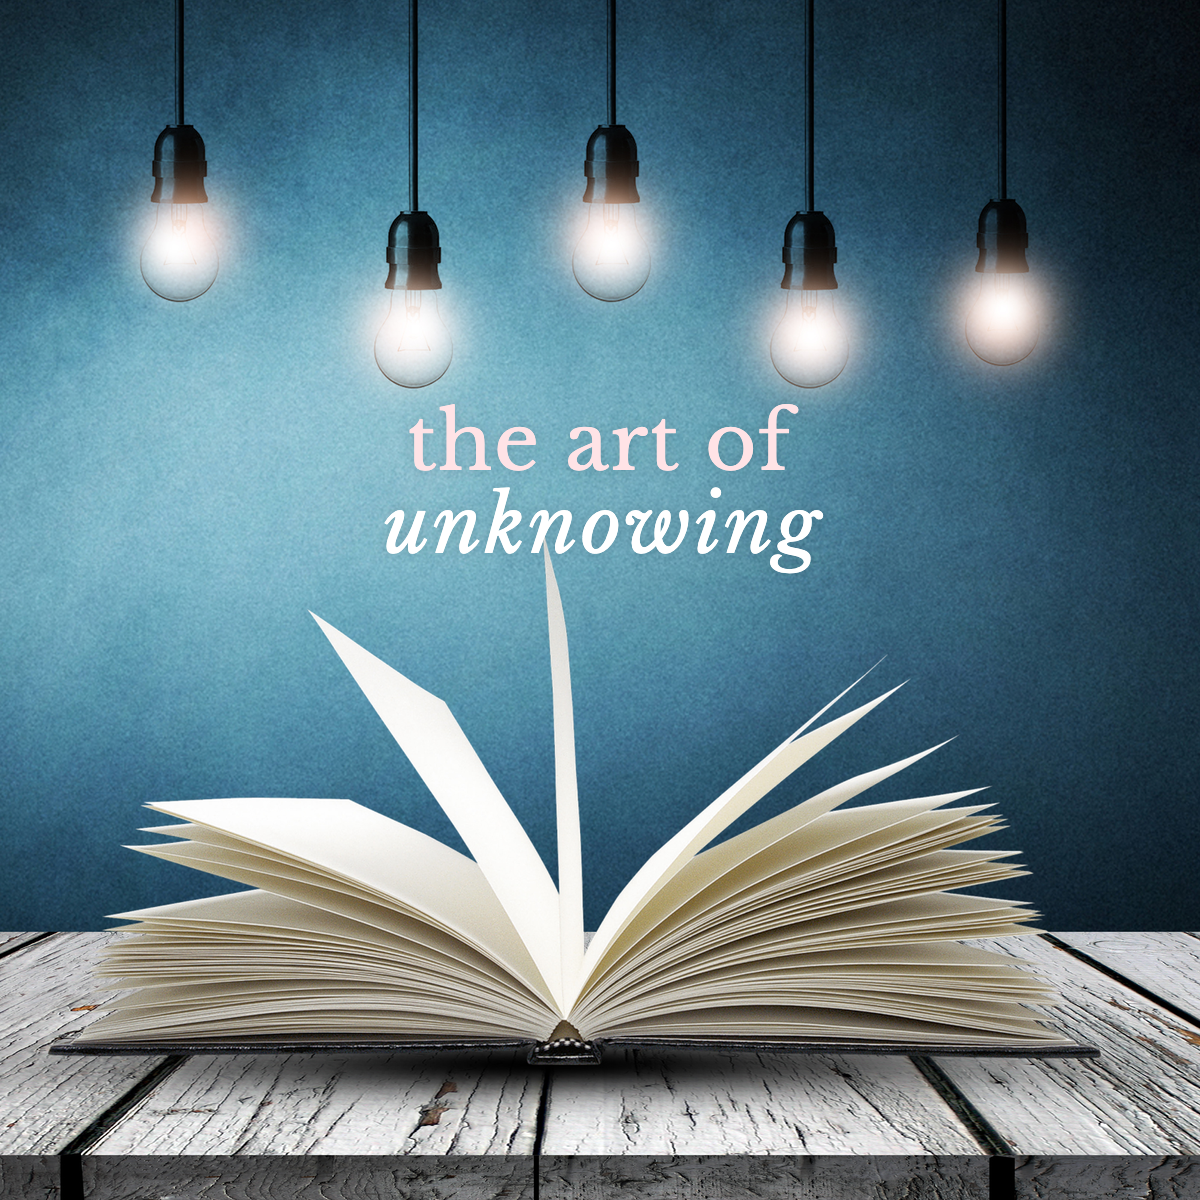 The Art of Unknowing Cover